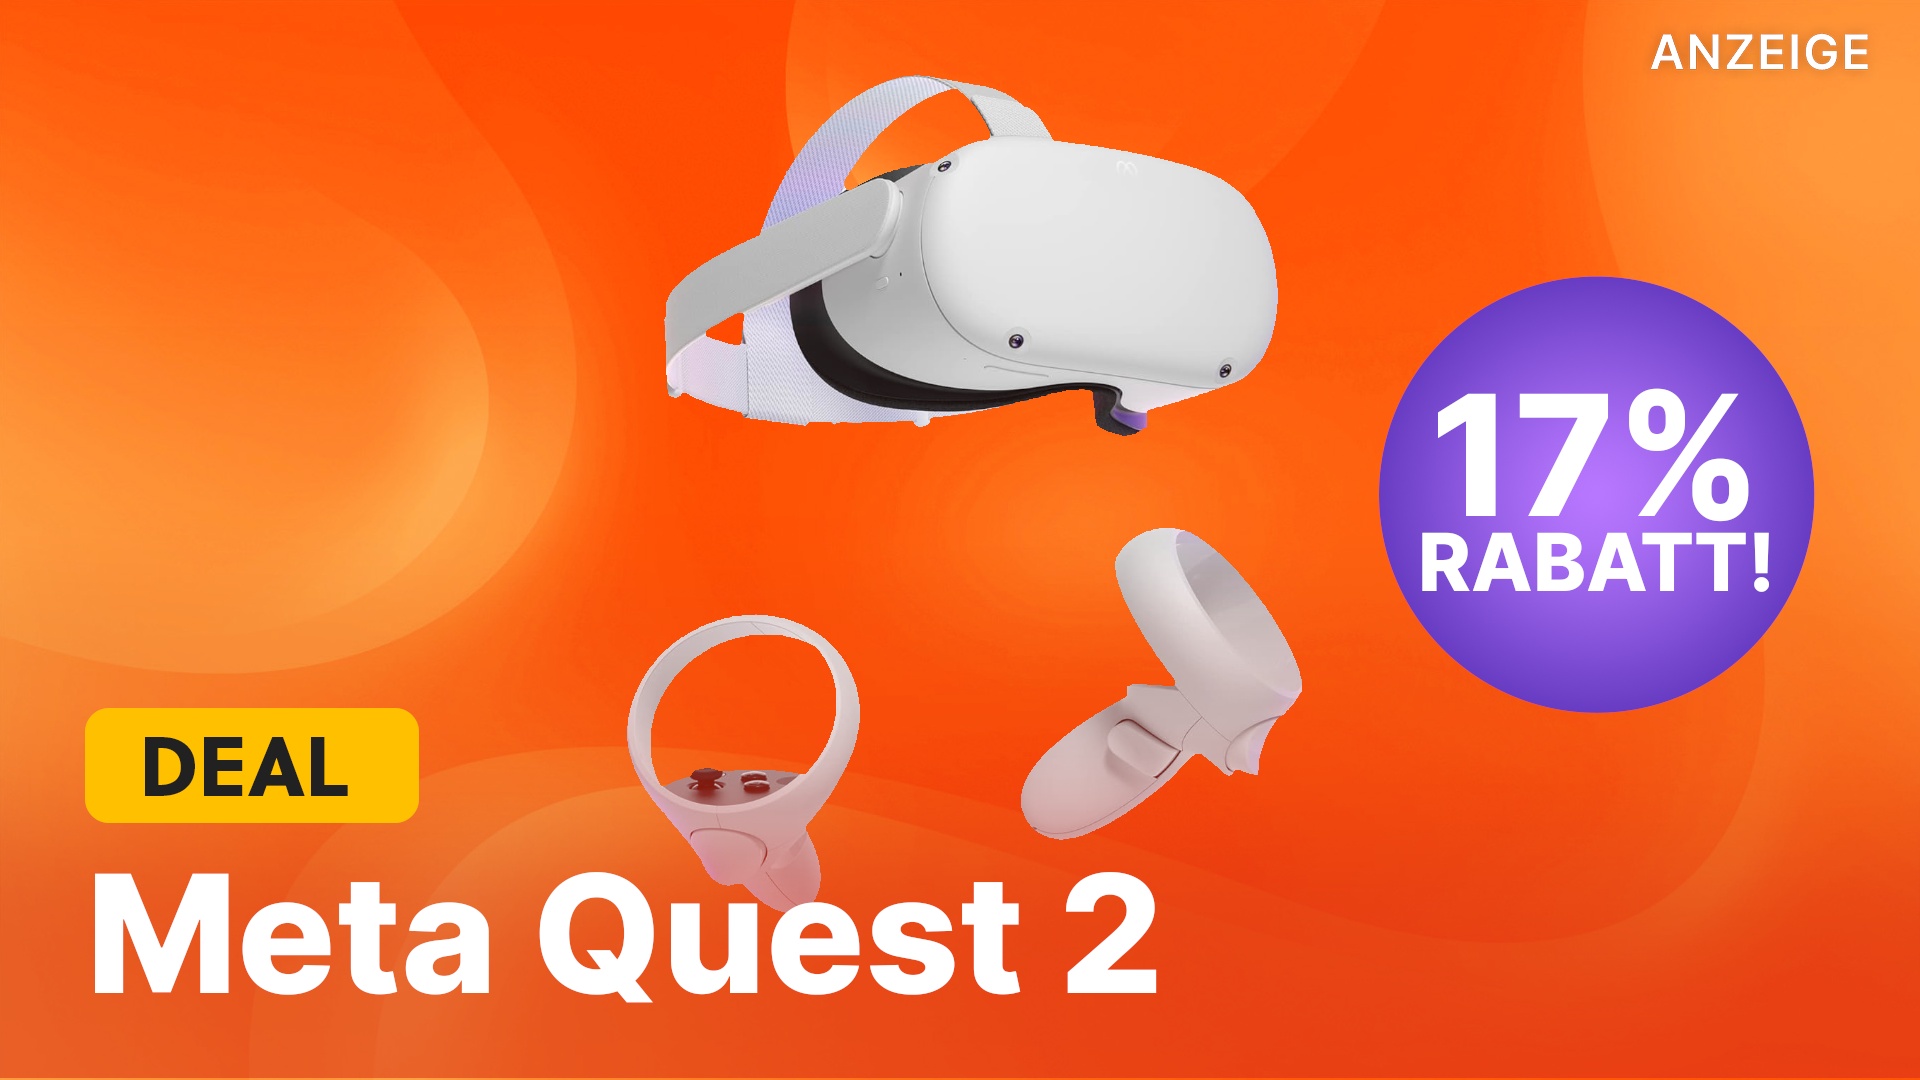 Getting started with VR is now really cheap!  Meta Quest 2 gives you virtual reality without a PC or console and is now available in a powerful offer!